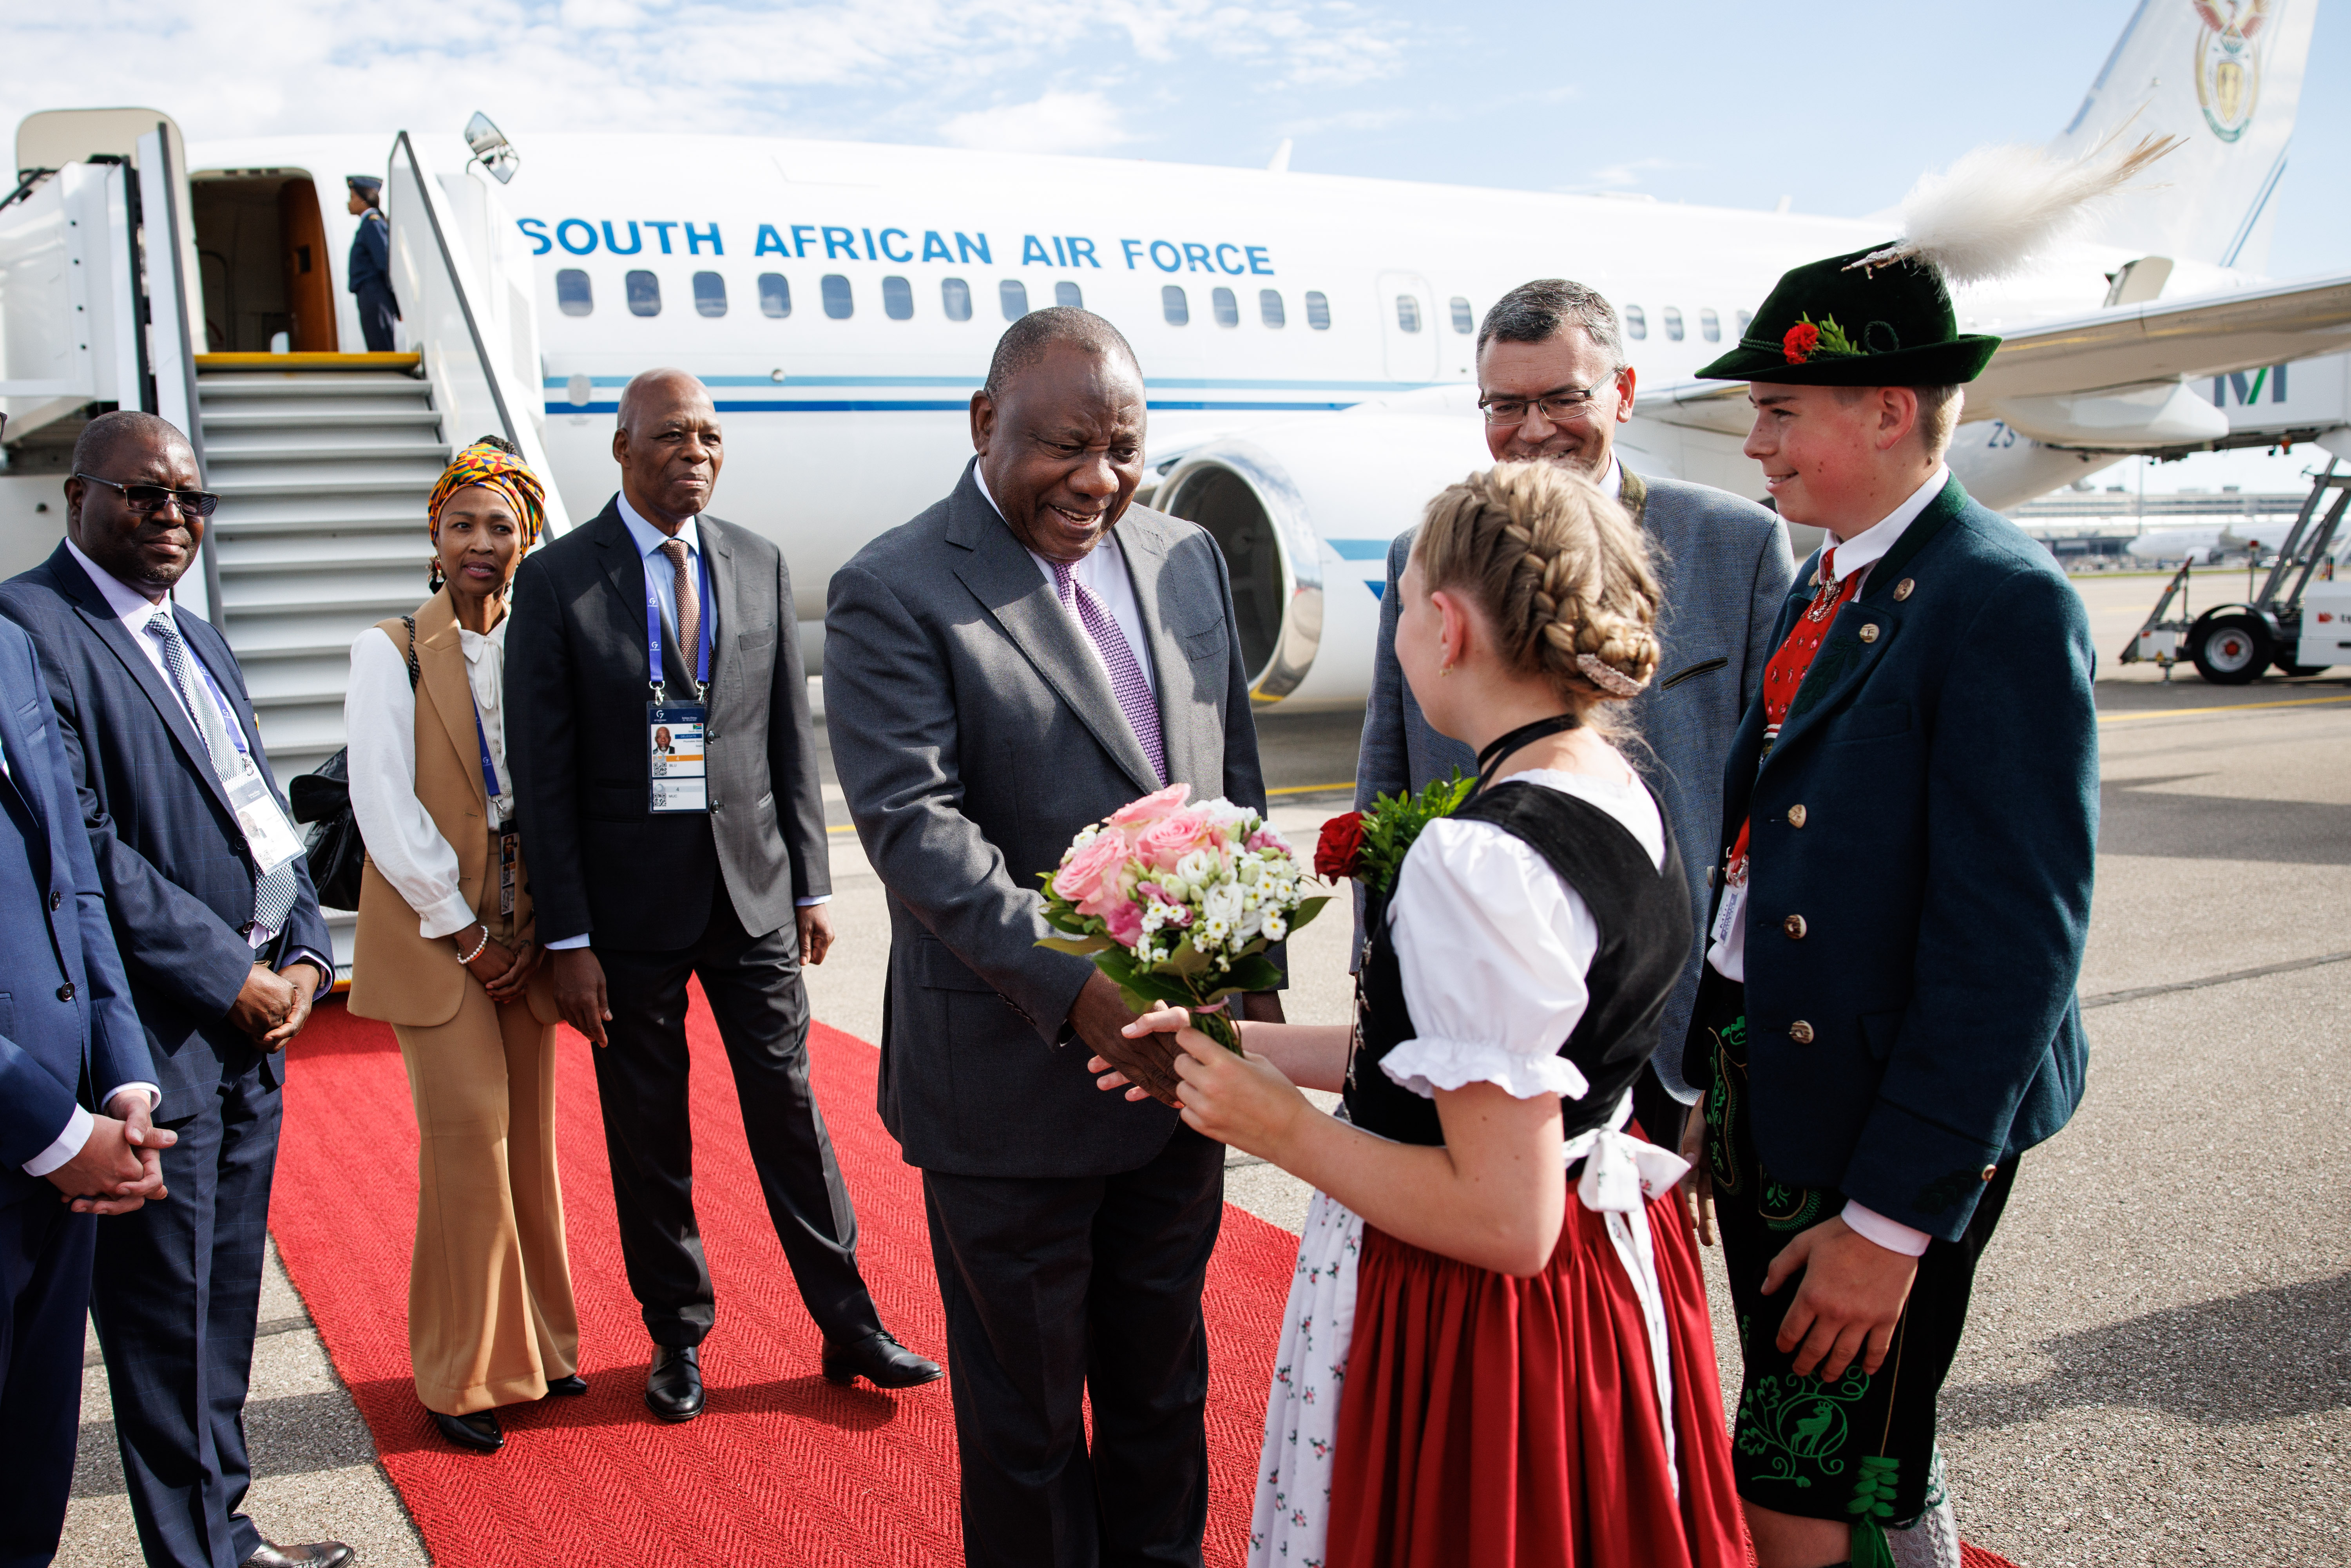 Arrival of Cyril Ramaphosa (President of South Africa) at Munich Airport and welcome by Florian Herrmann, Head of the Bavarian State Chancellery, and a girl wearing traditional costume.